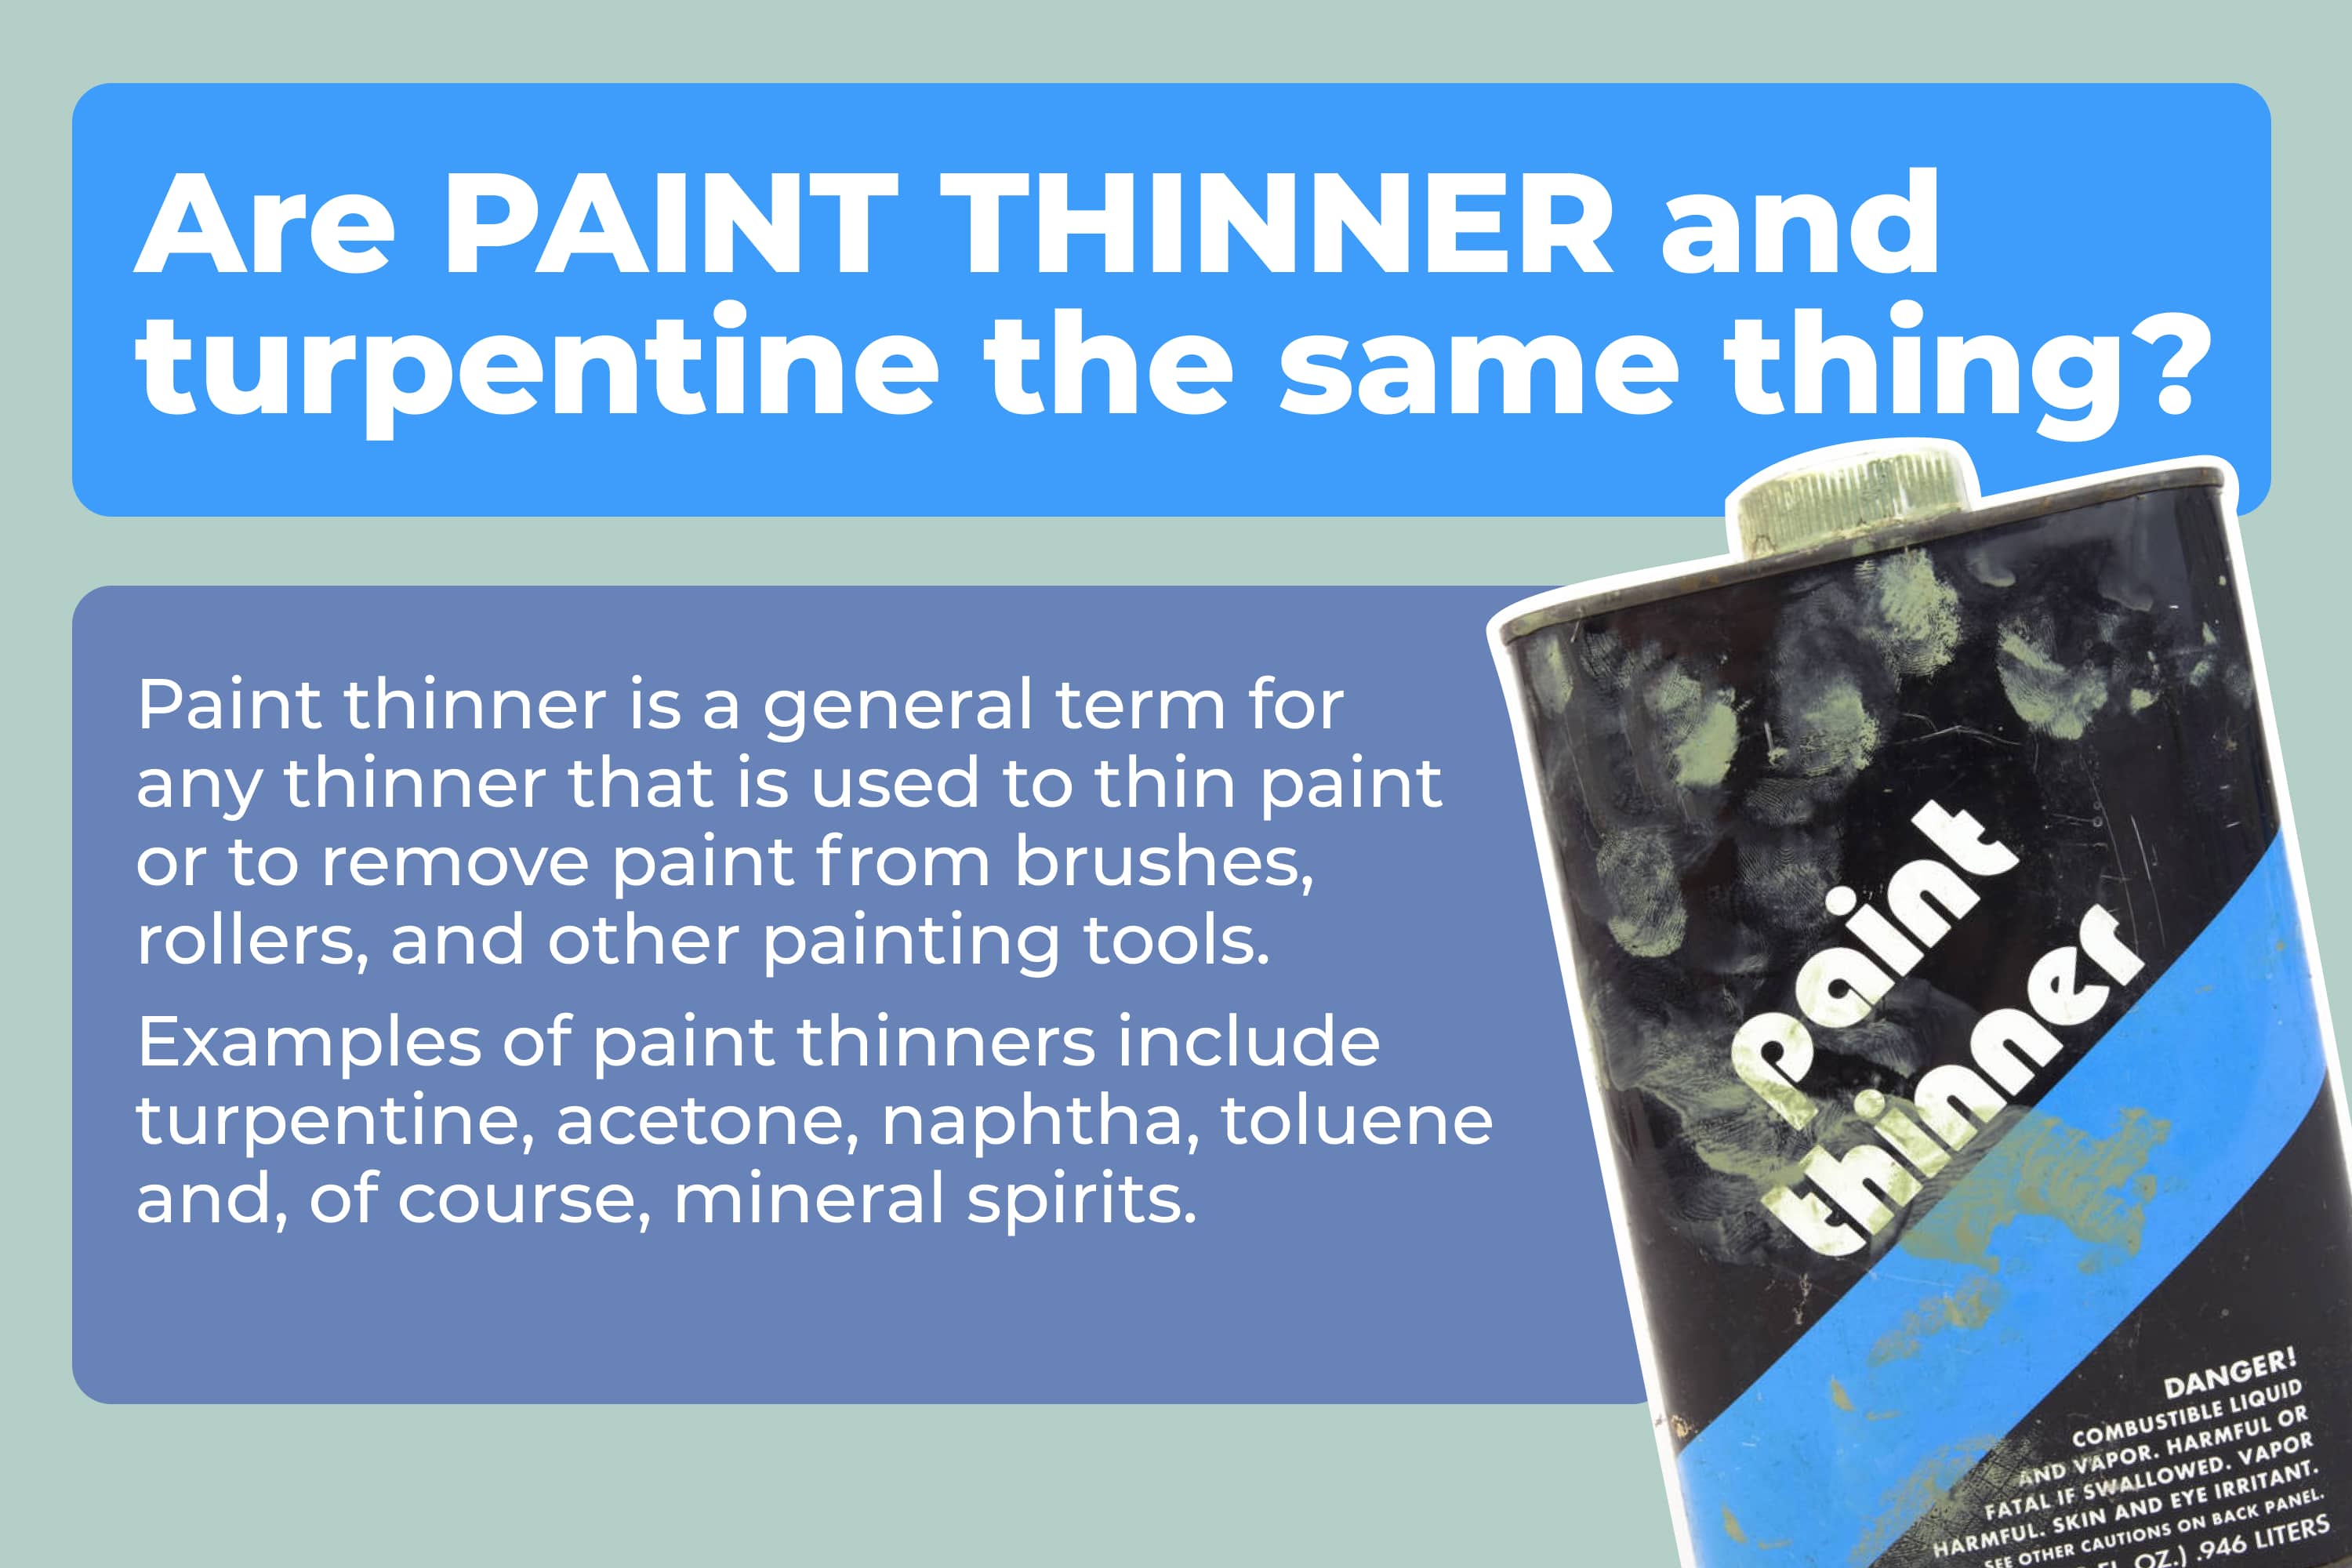 Apply the Product.Are paint thinner and turpentine the same thing